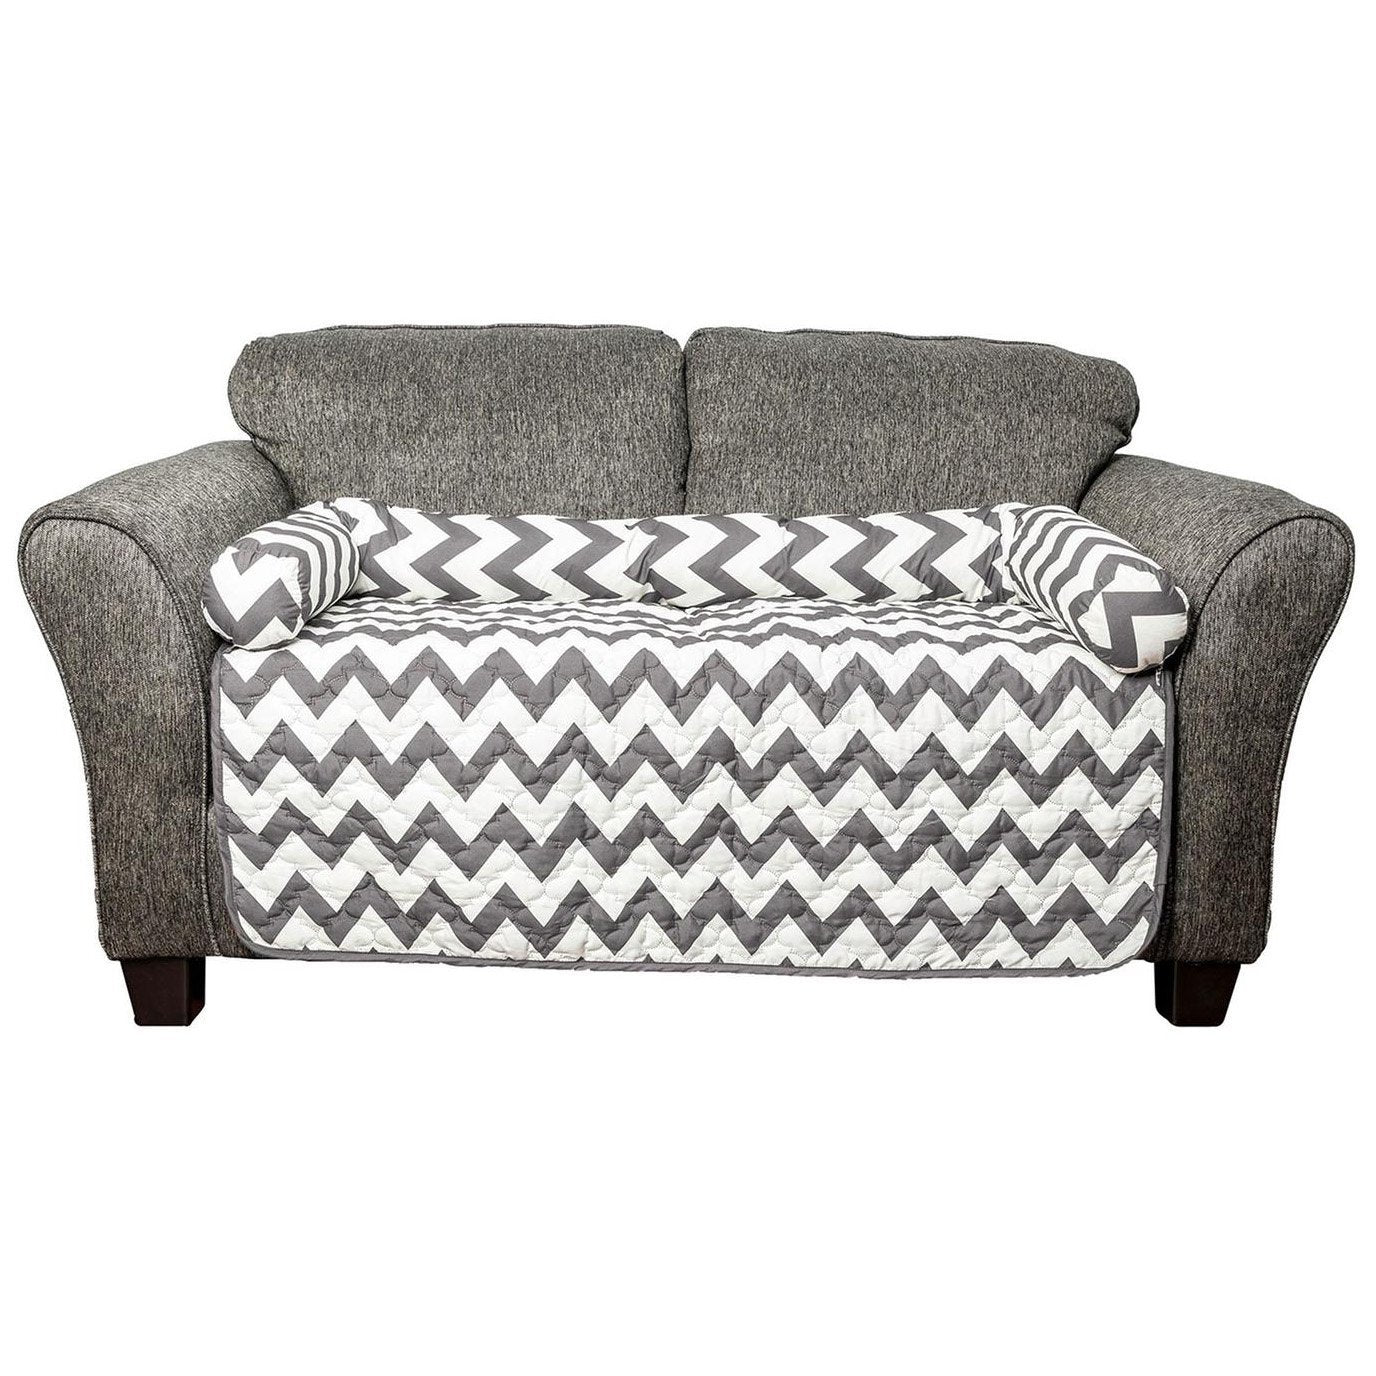 Chevron Reversible Quilted Pet Bed Chair Cover - Assorted Sizes / Gray / Large